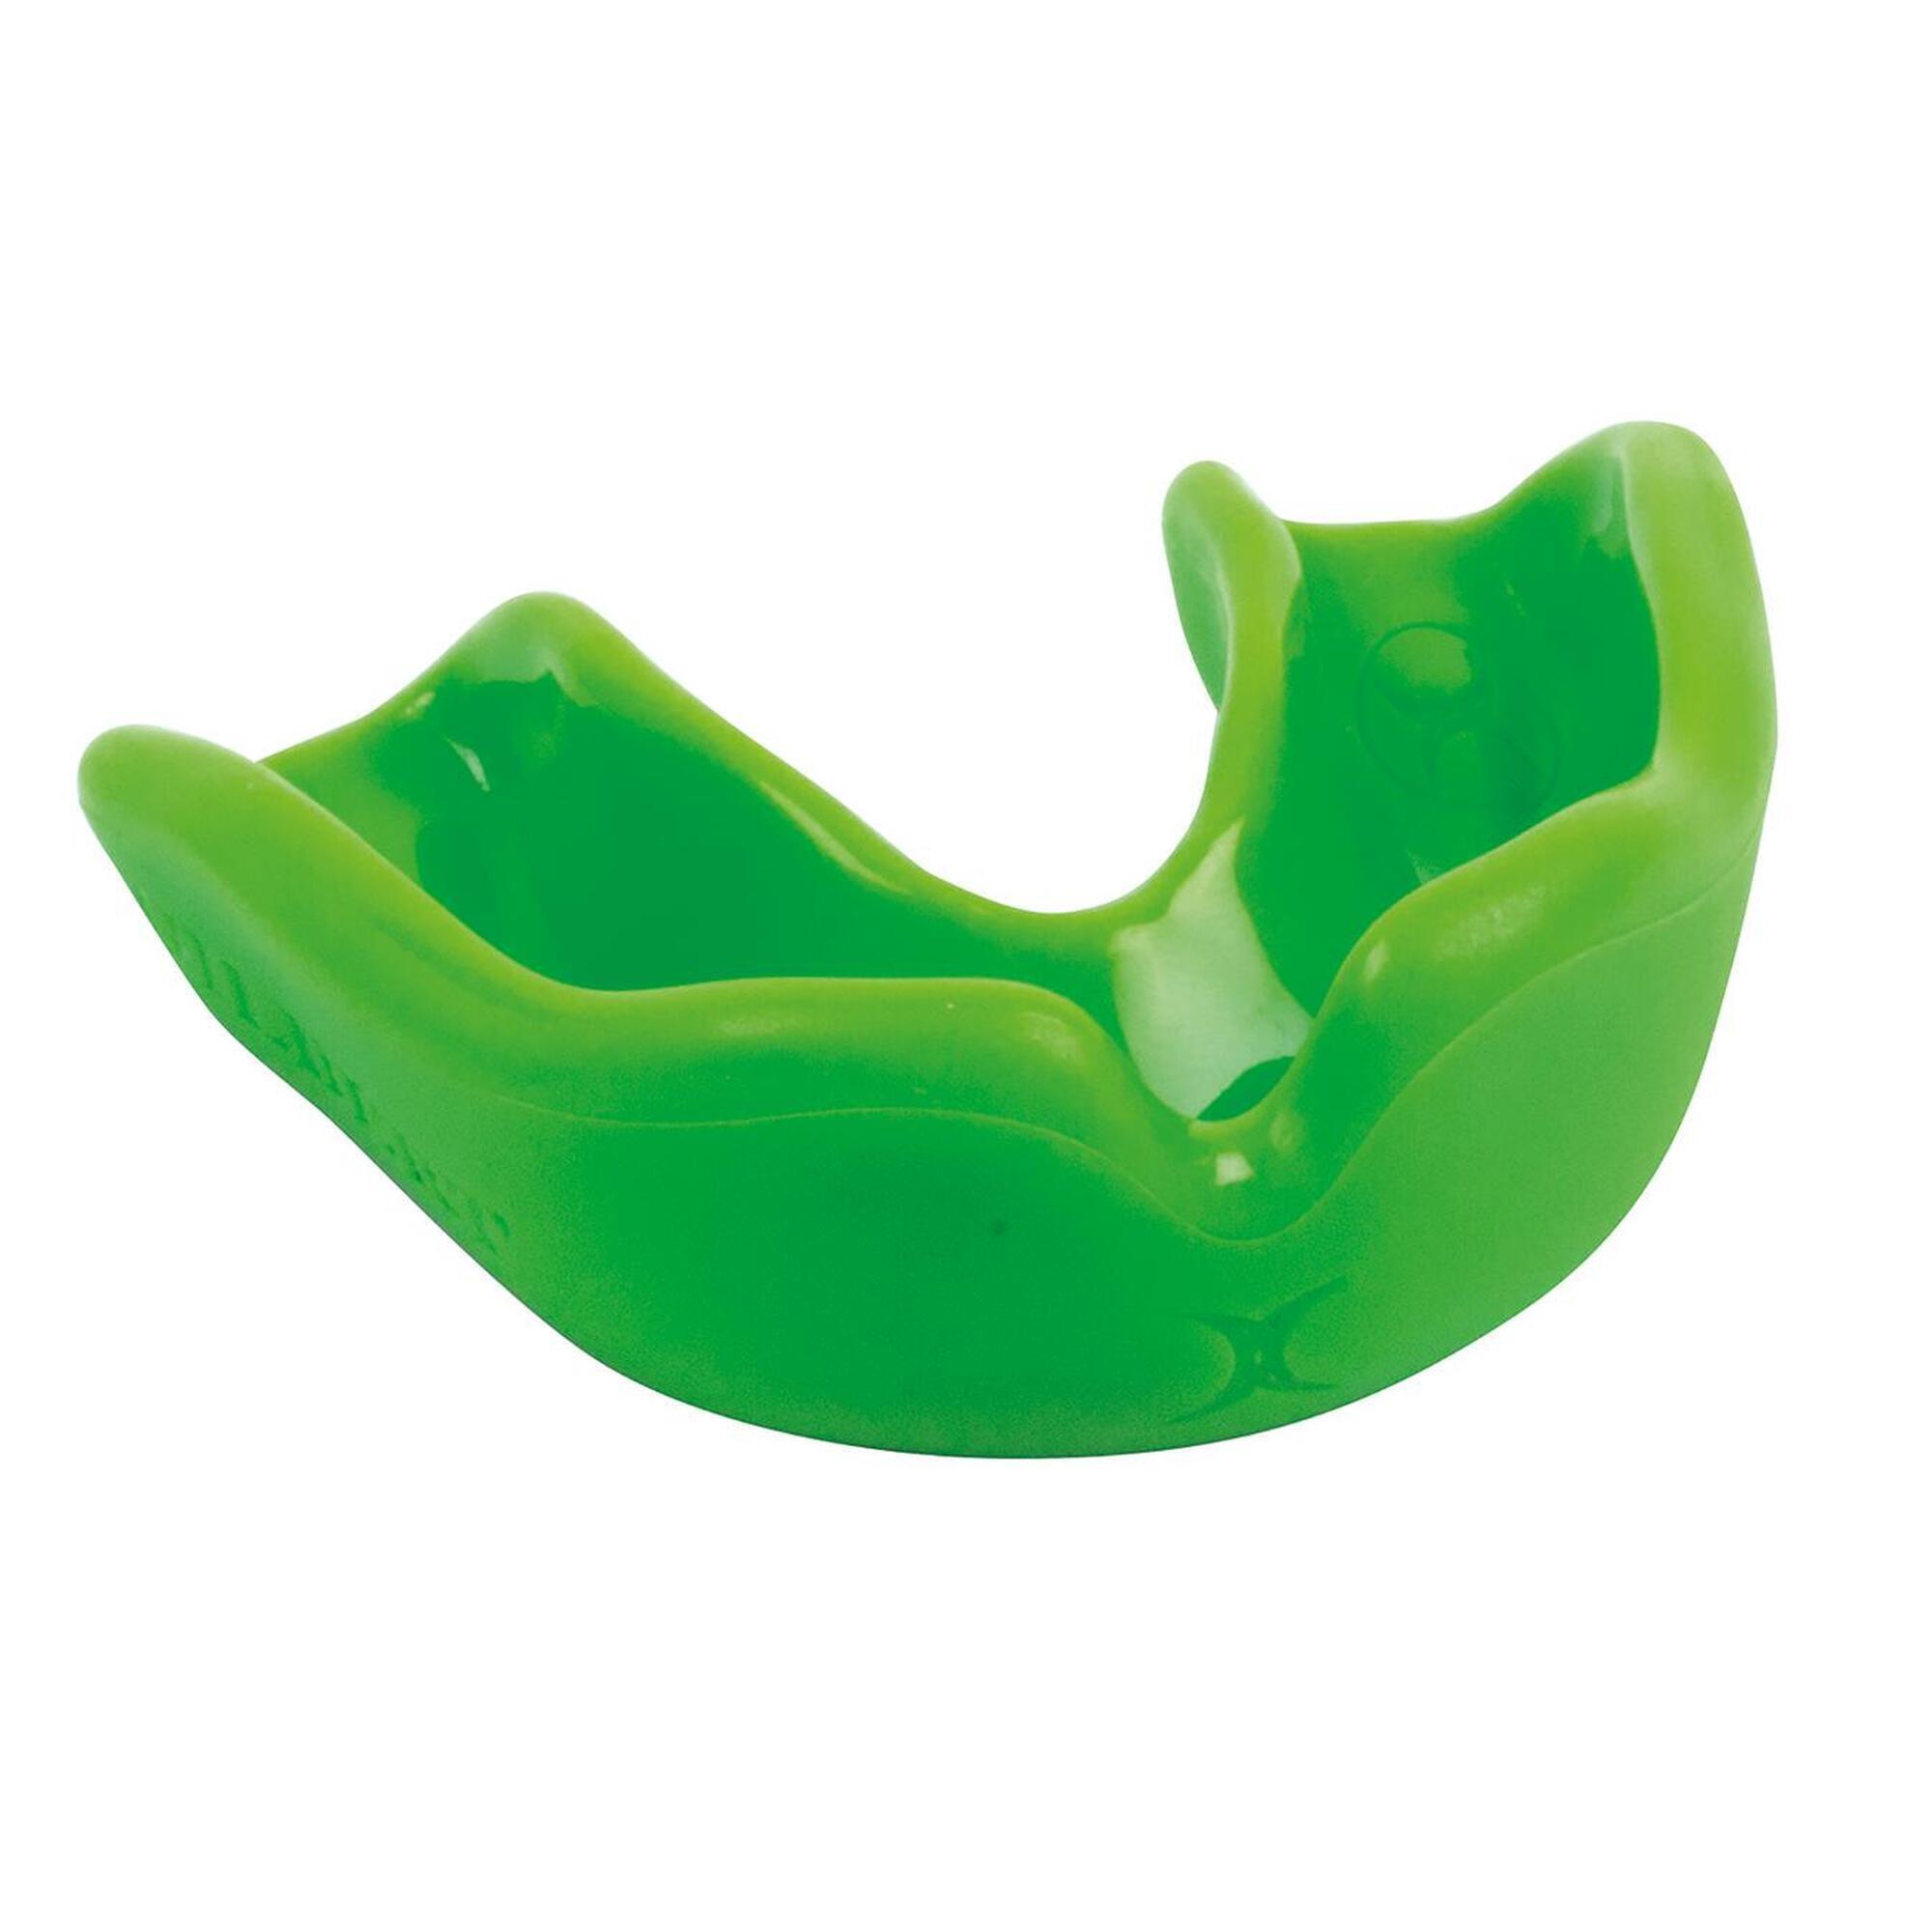 Academy Mouthguard - Black - Adult 3/3